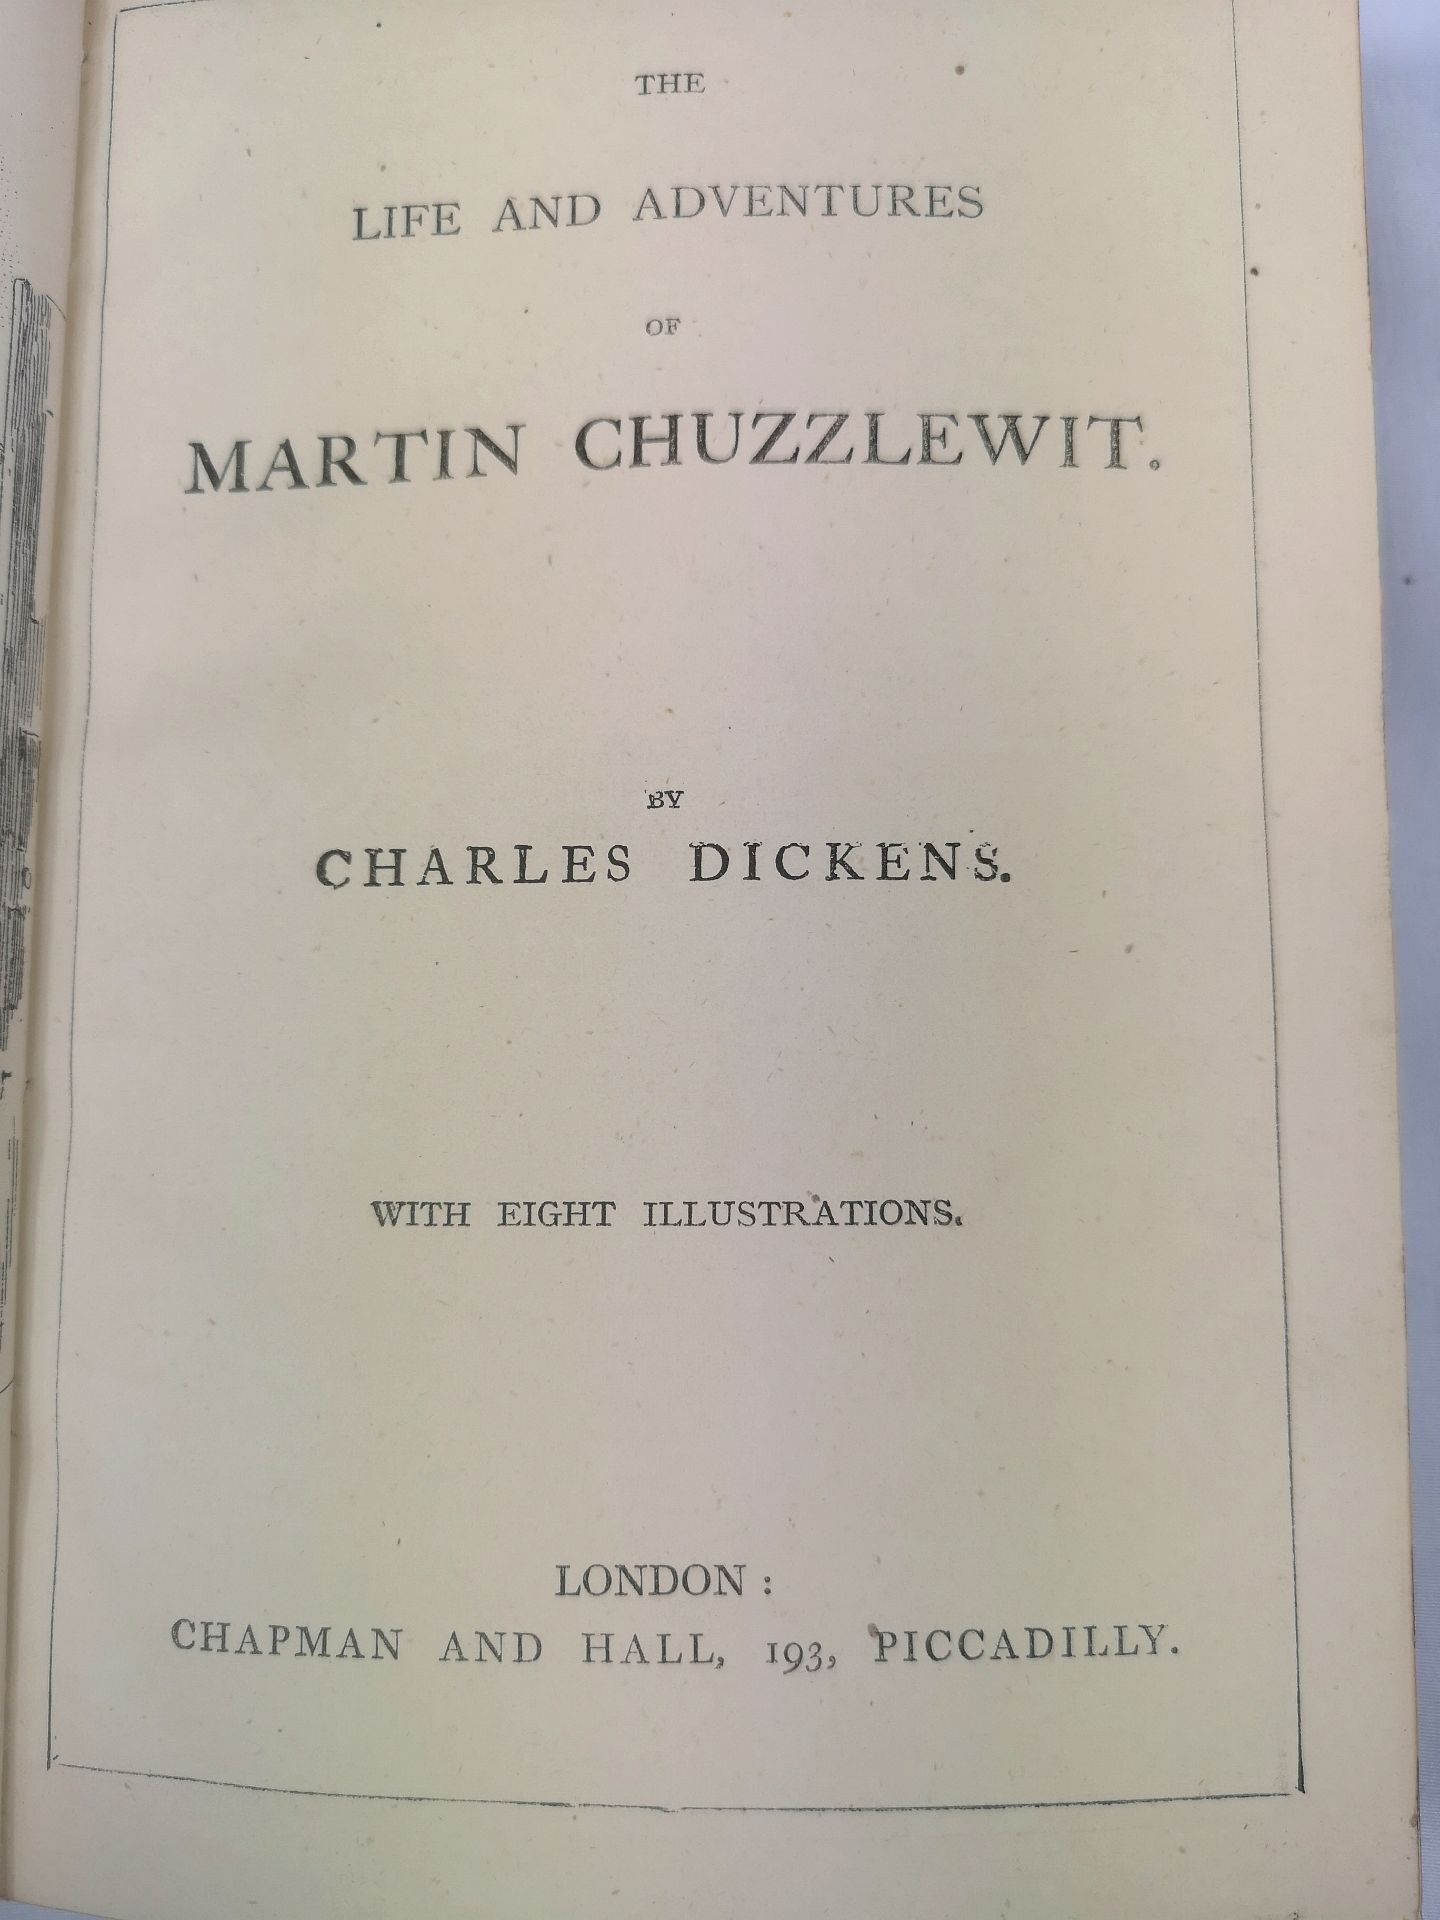 Dickens Works, fifteen half bound volumes by Charles Dickens - Image 2 of 3